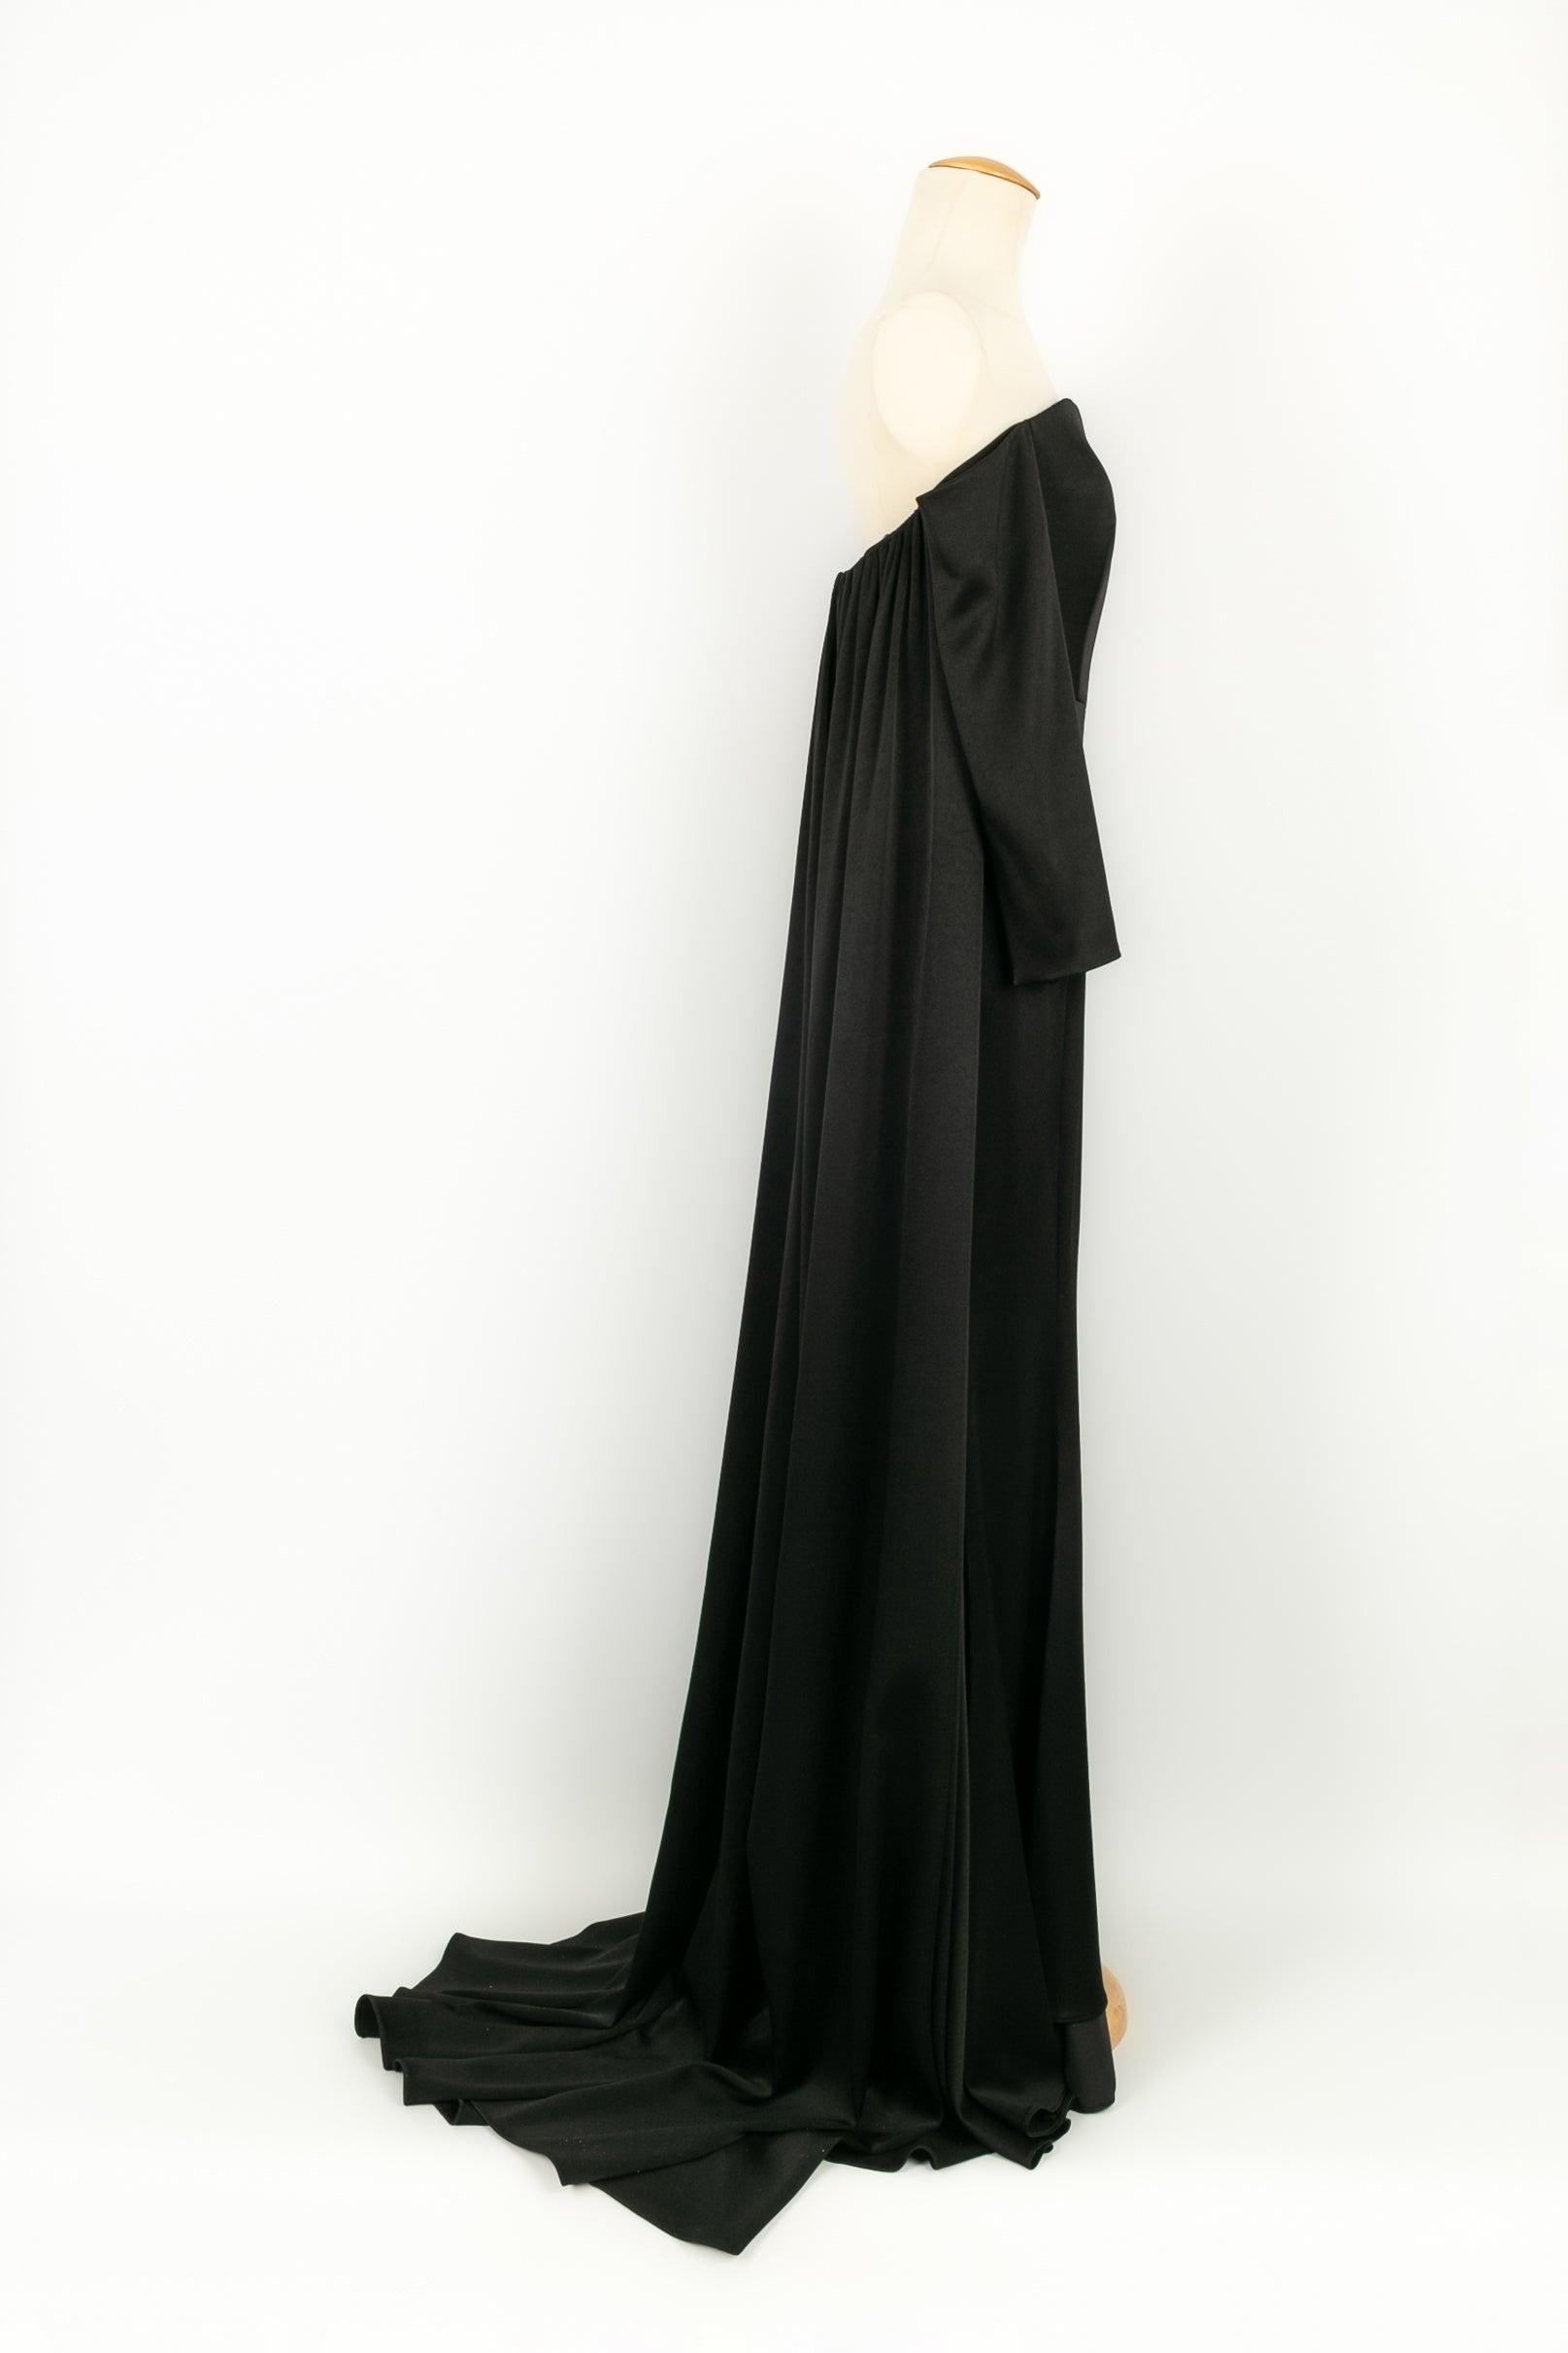 Paule Ka - Black maxi dress in duchess satin. 2022 Collection. Size 36FR.

Additional information:
Condition: Very good condition
Dimensions: Length: from 130 cm to 170 cm
Period: 21st Century

Seller Reference: VR233